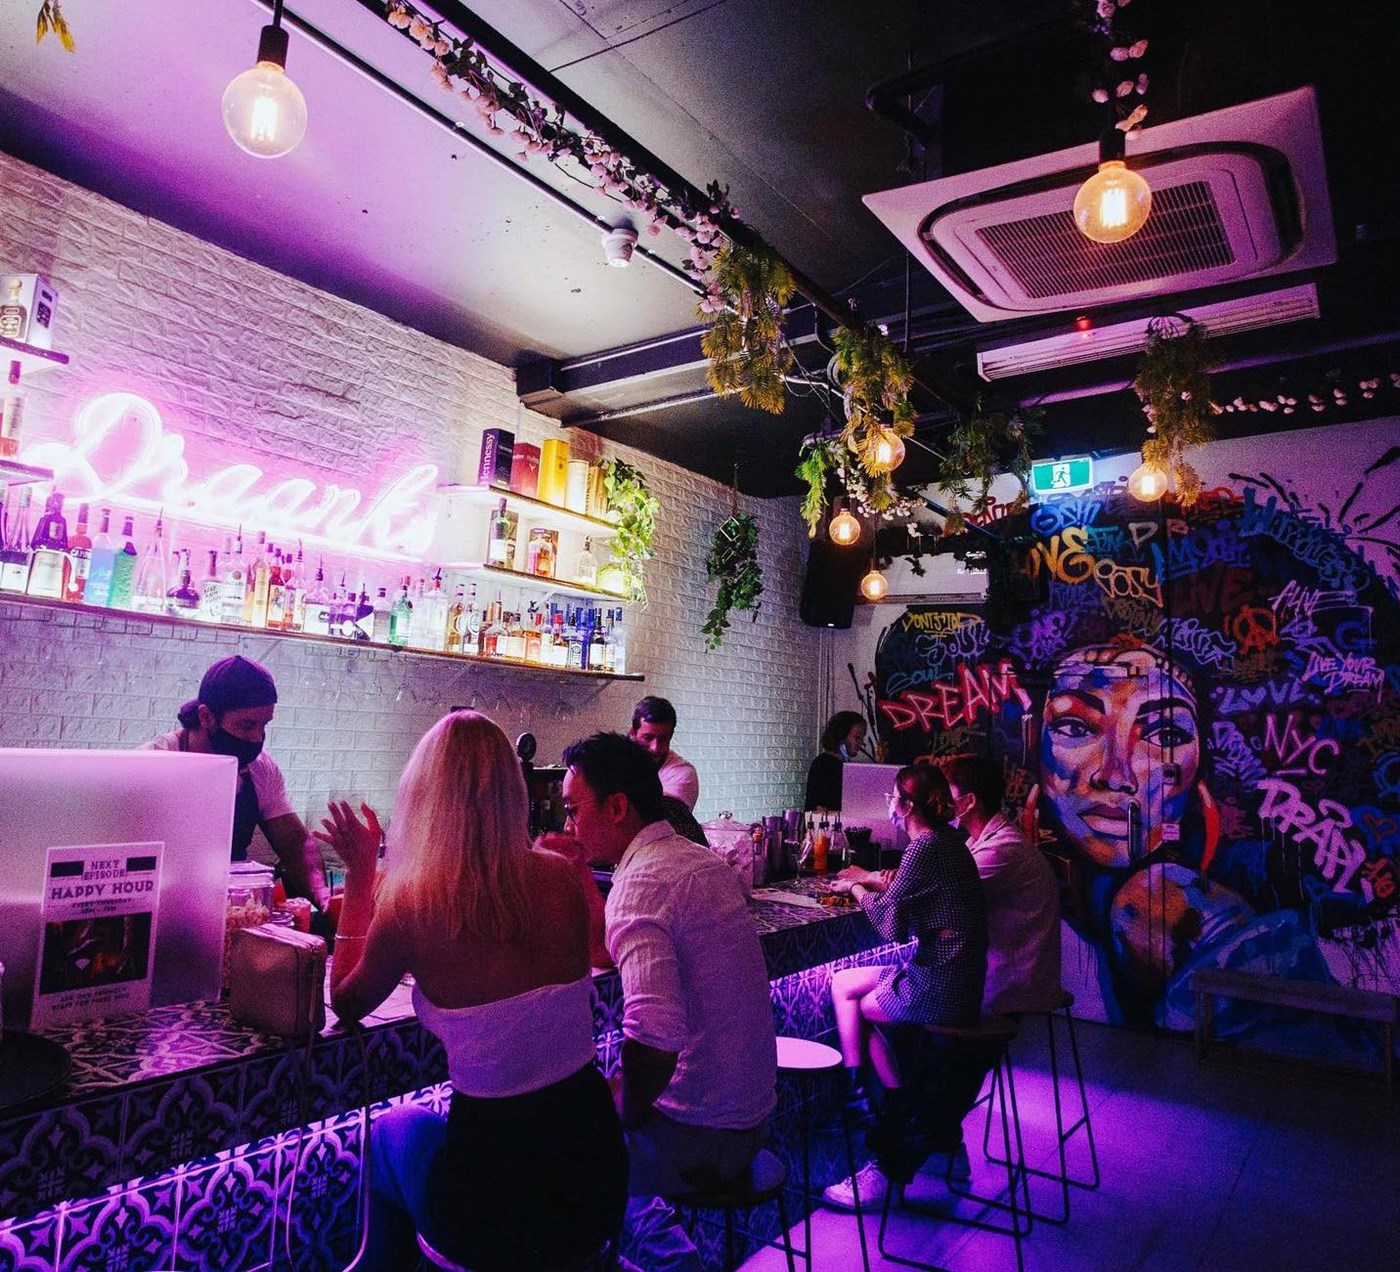 A moody bar with graffitied walls, customers seated at the bar